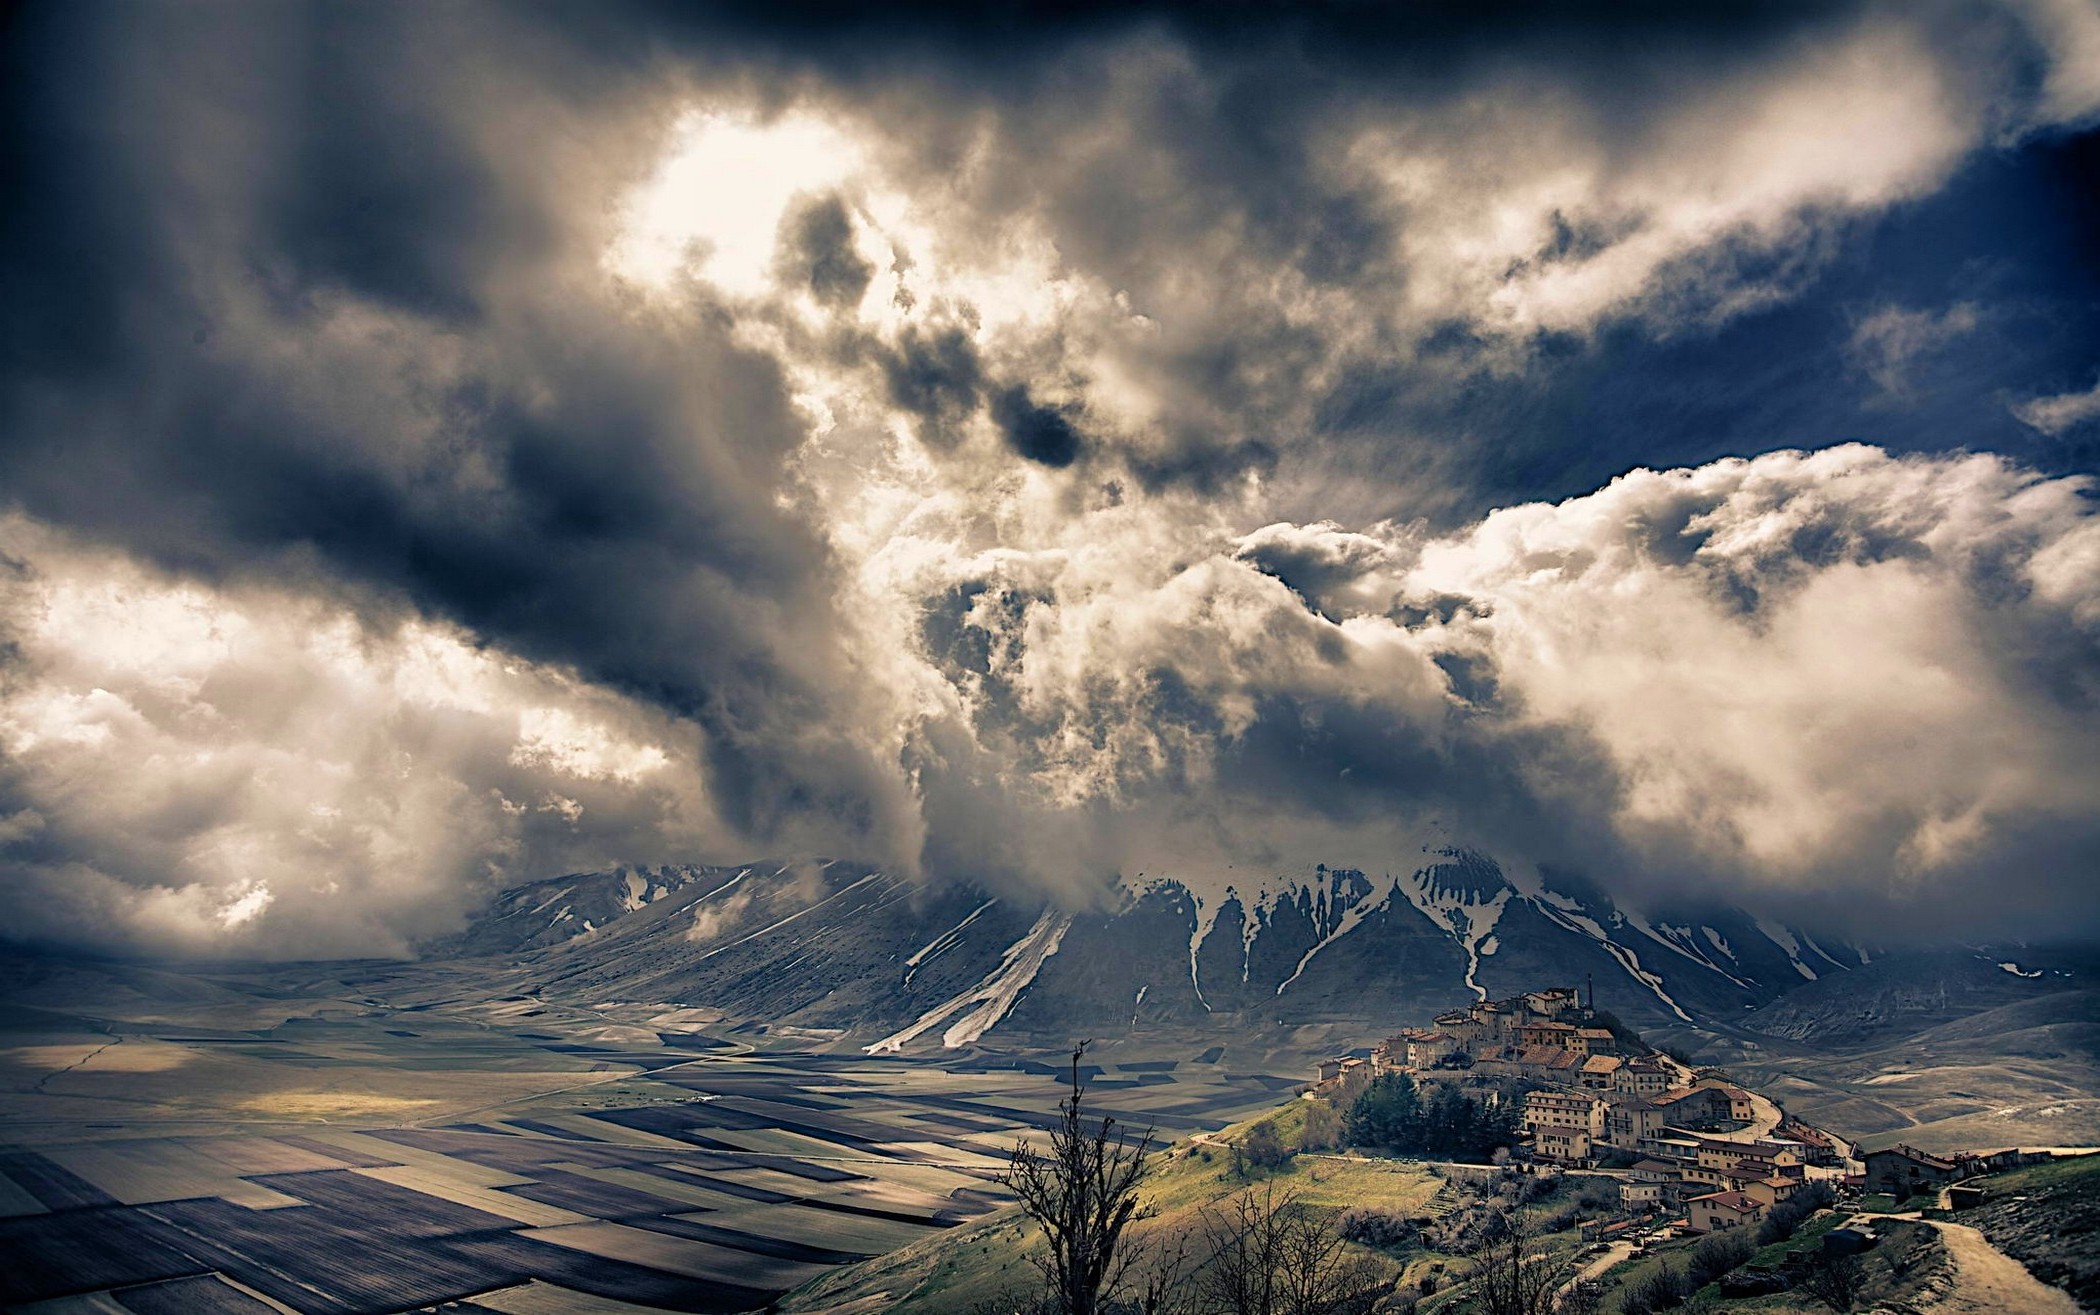 nature, Landscape, Mountain, Alps, Sky, Clouds, Valley, Italy, Village, Field, Storm, Snowy Peak Wallpaper